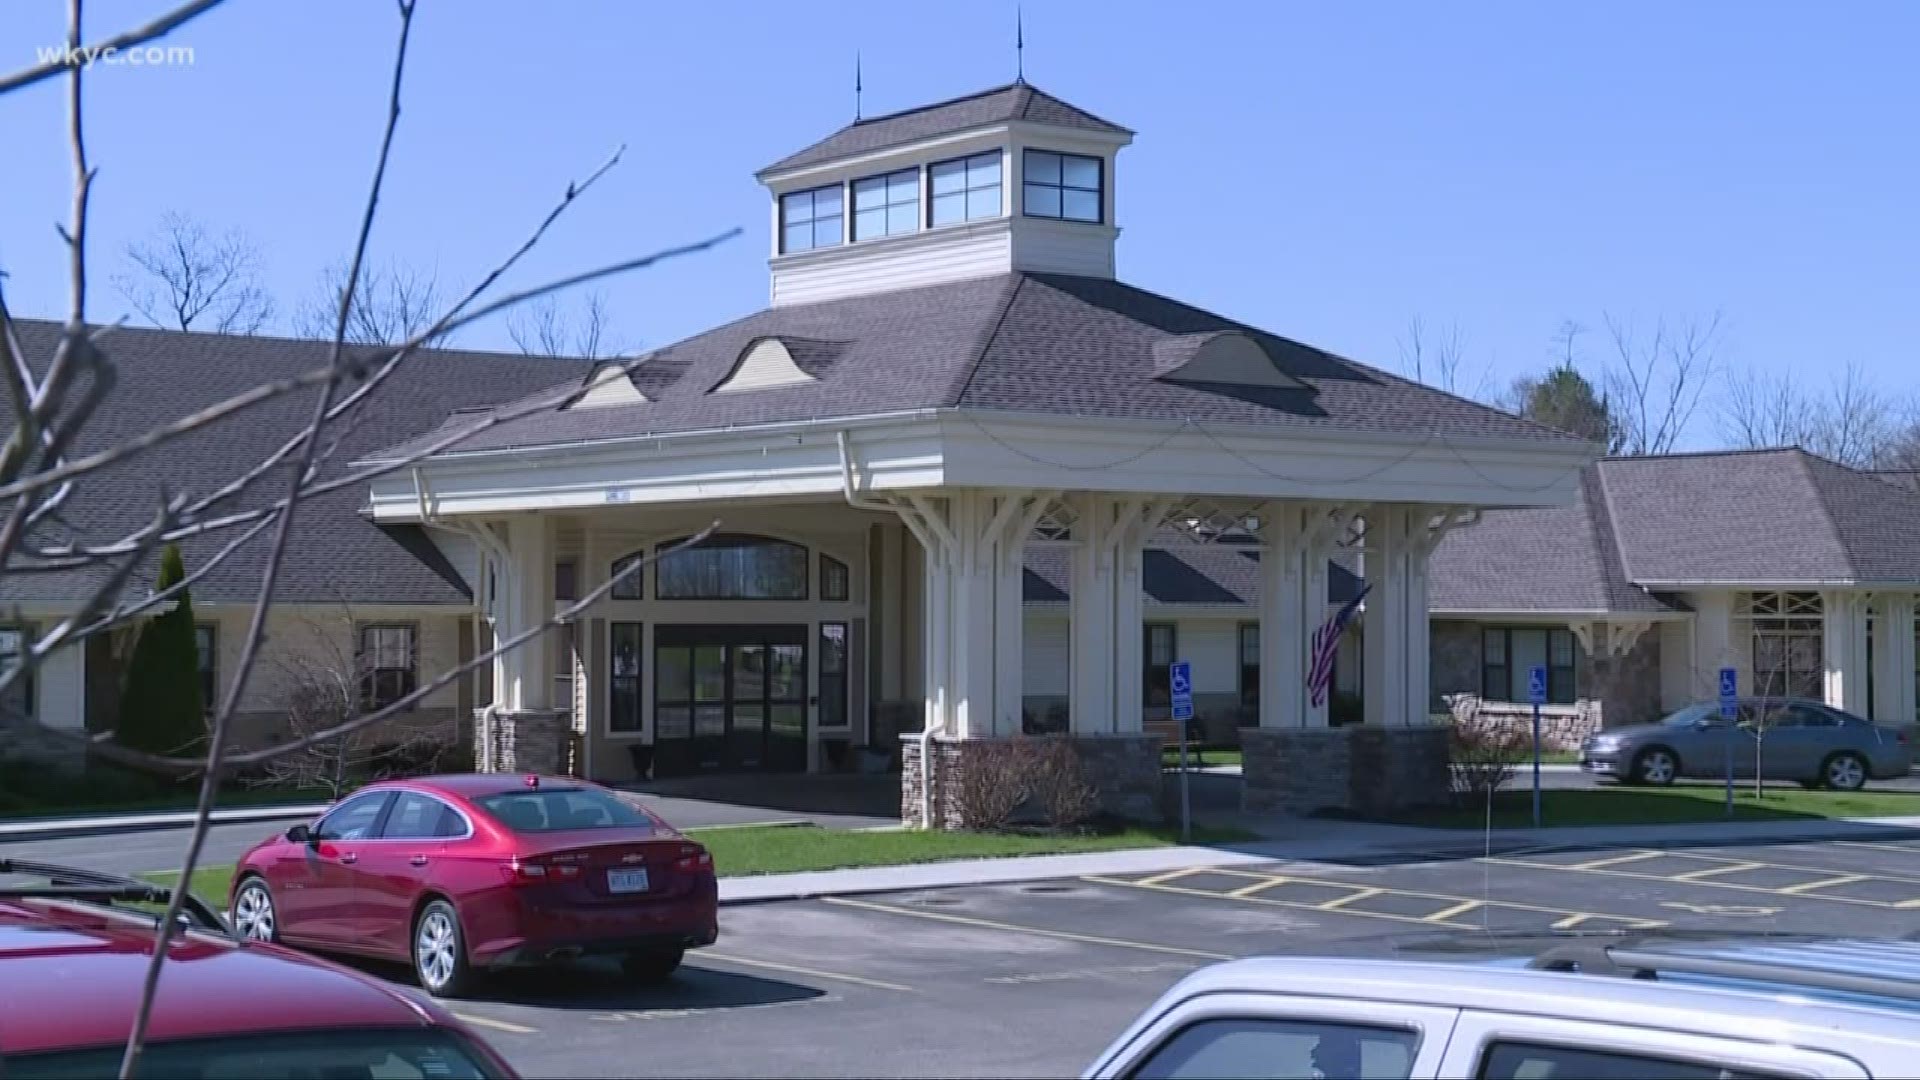 A portage county long term care facility is dealing with a cluster of COVID-19 cases. Tiffany Tarpley reports, at least 10 residents have tested positive, 1 death